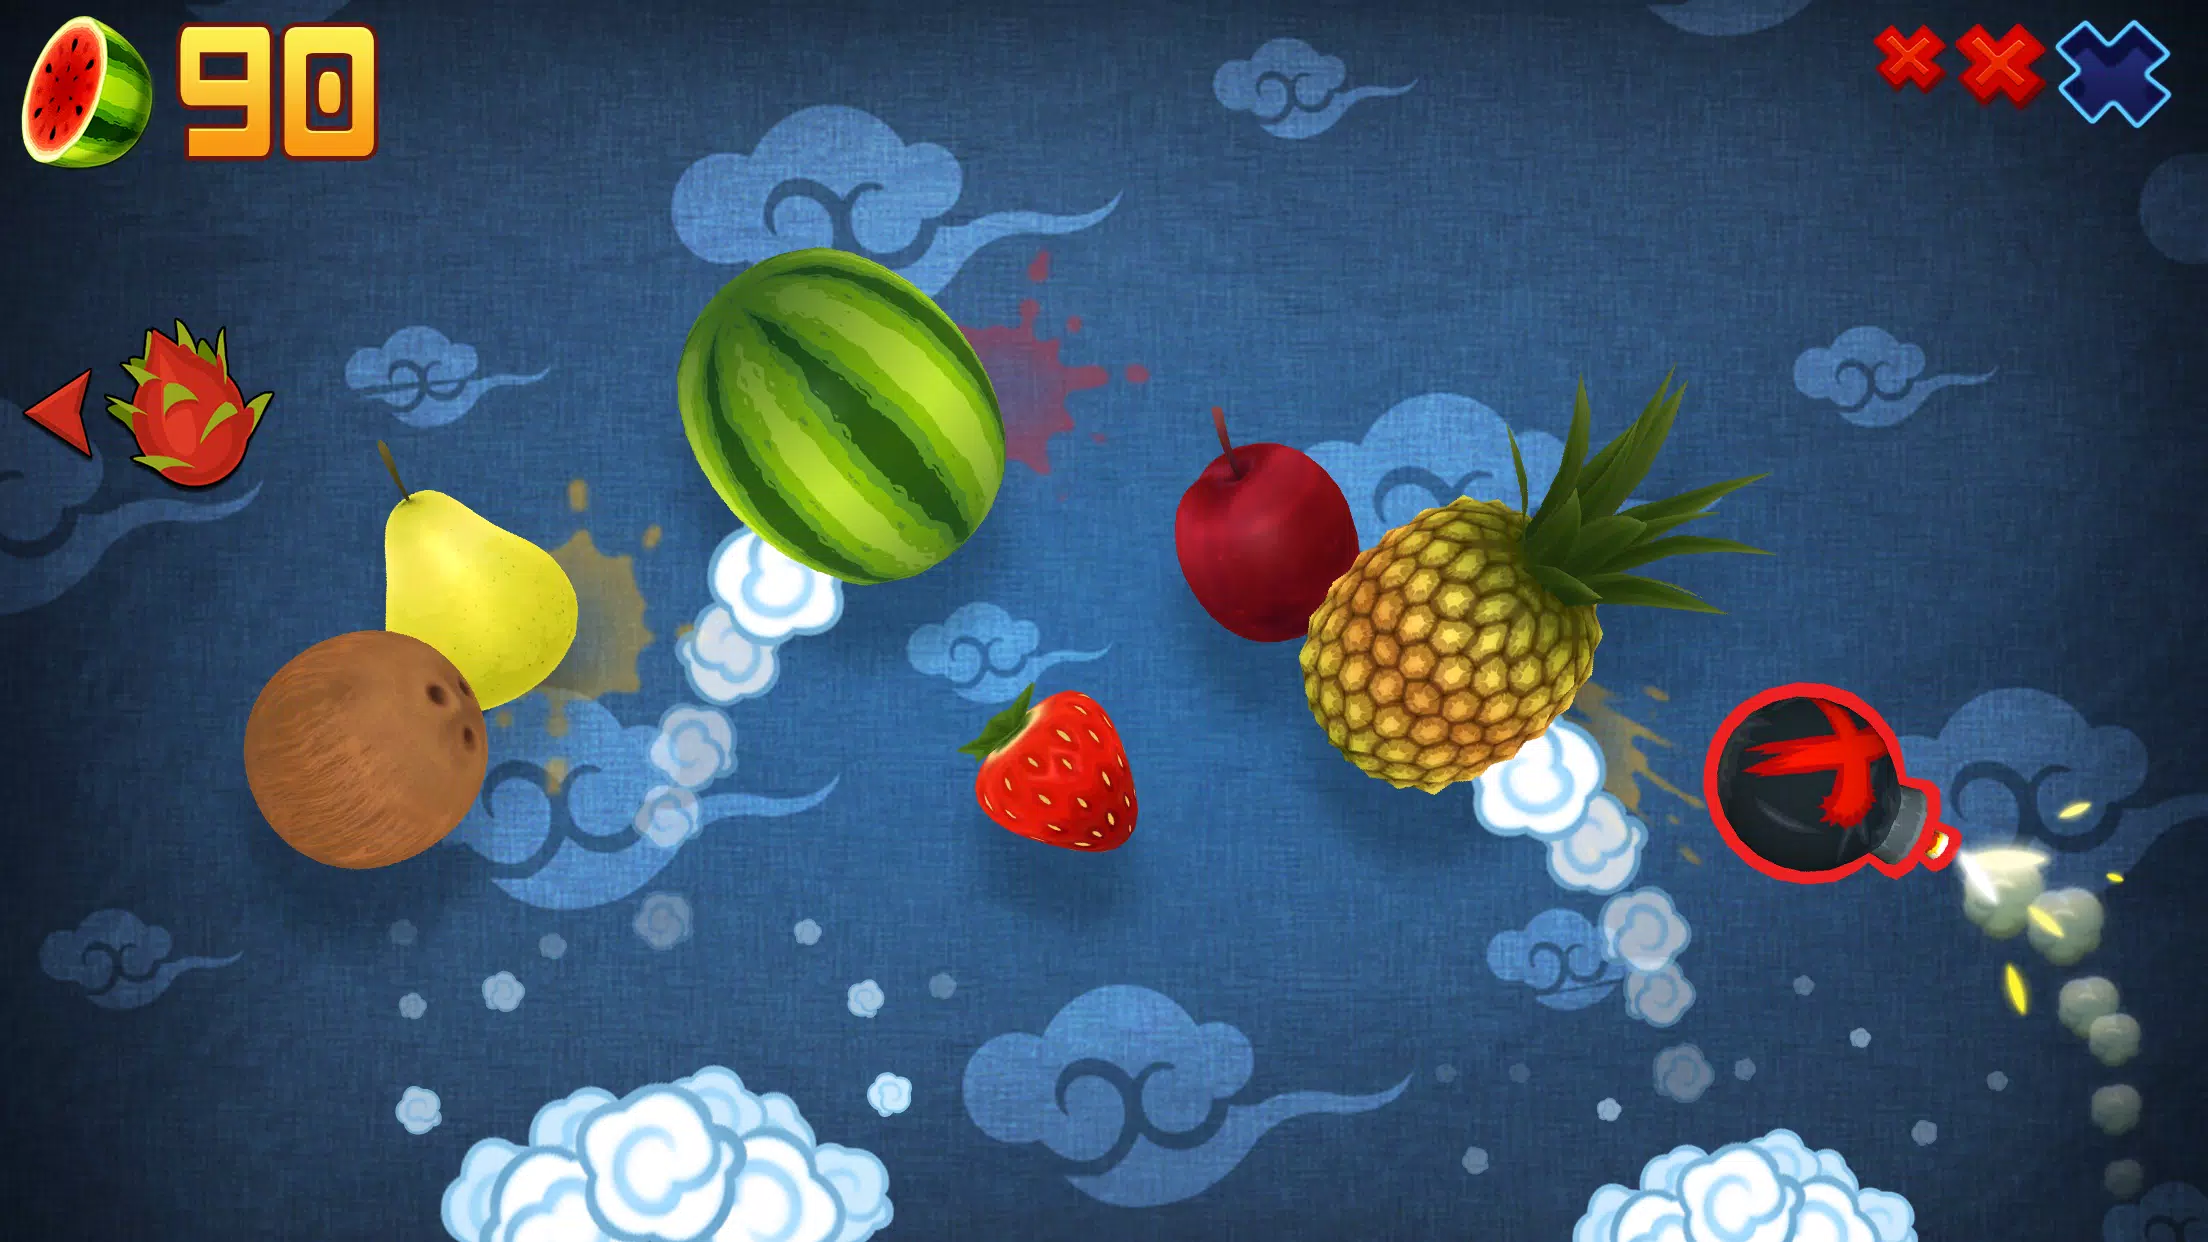 Fruit Ninja Classic+ for Android - App Download